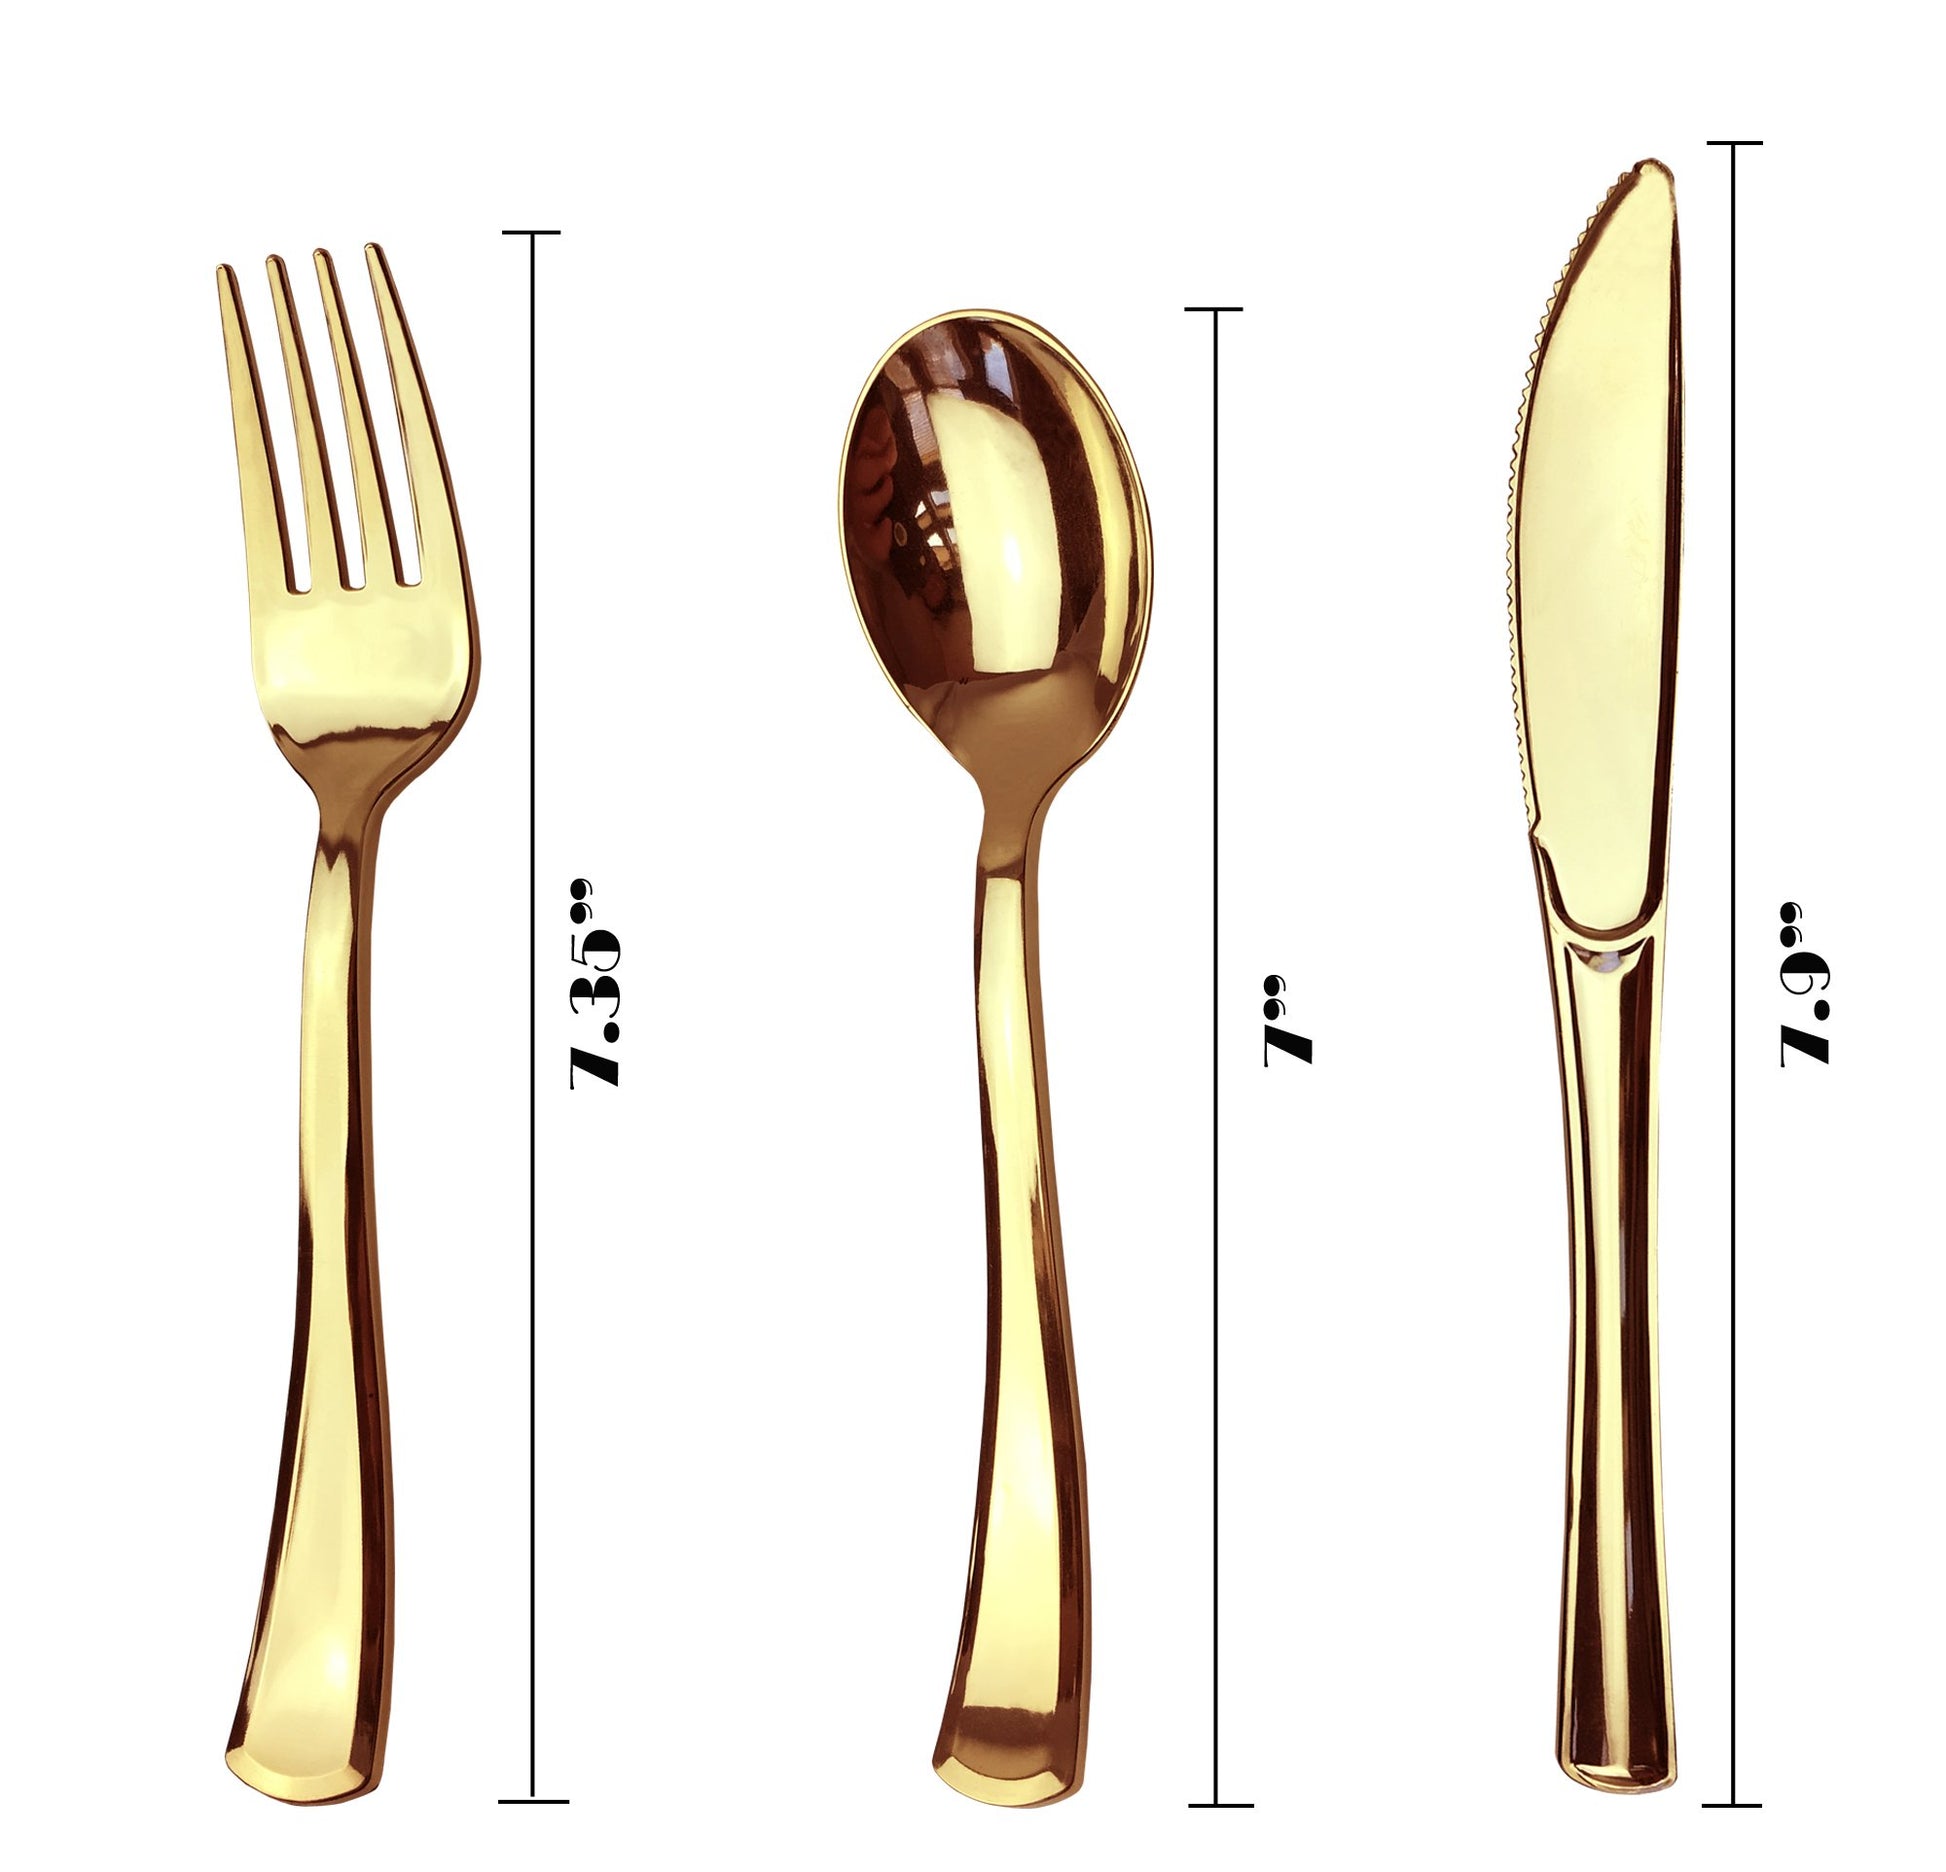 Clear and Gold Plastic Serving Fork • Spoon Set - Luxe Party NYC